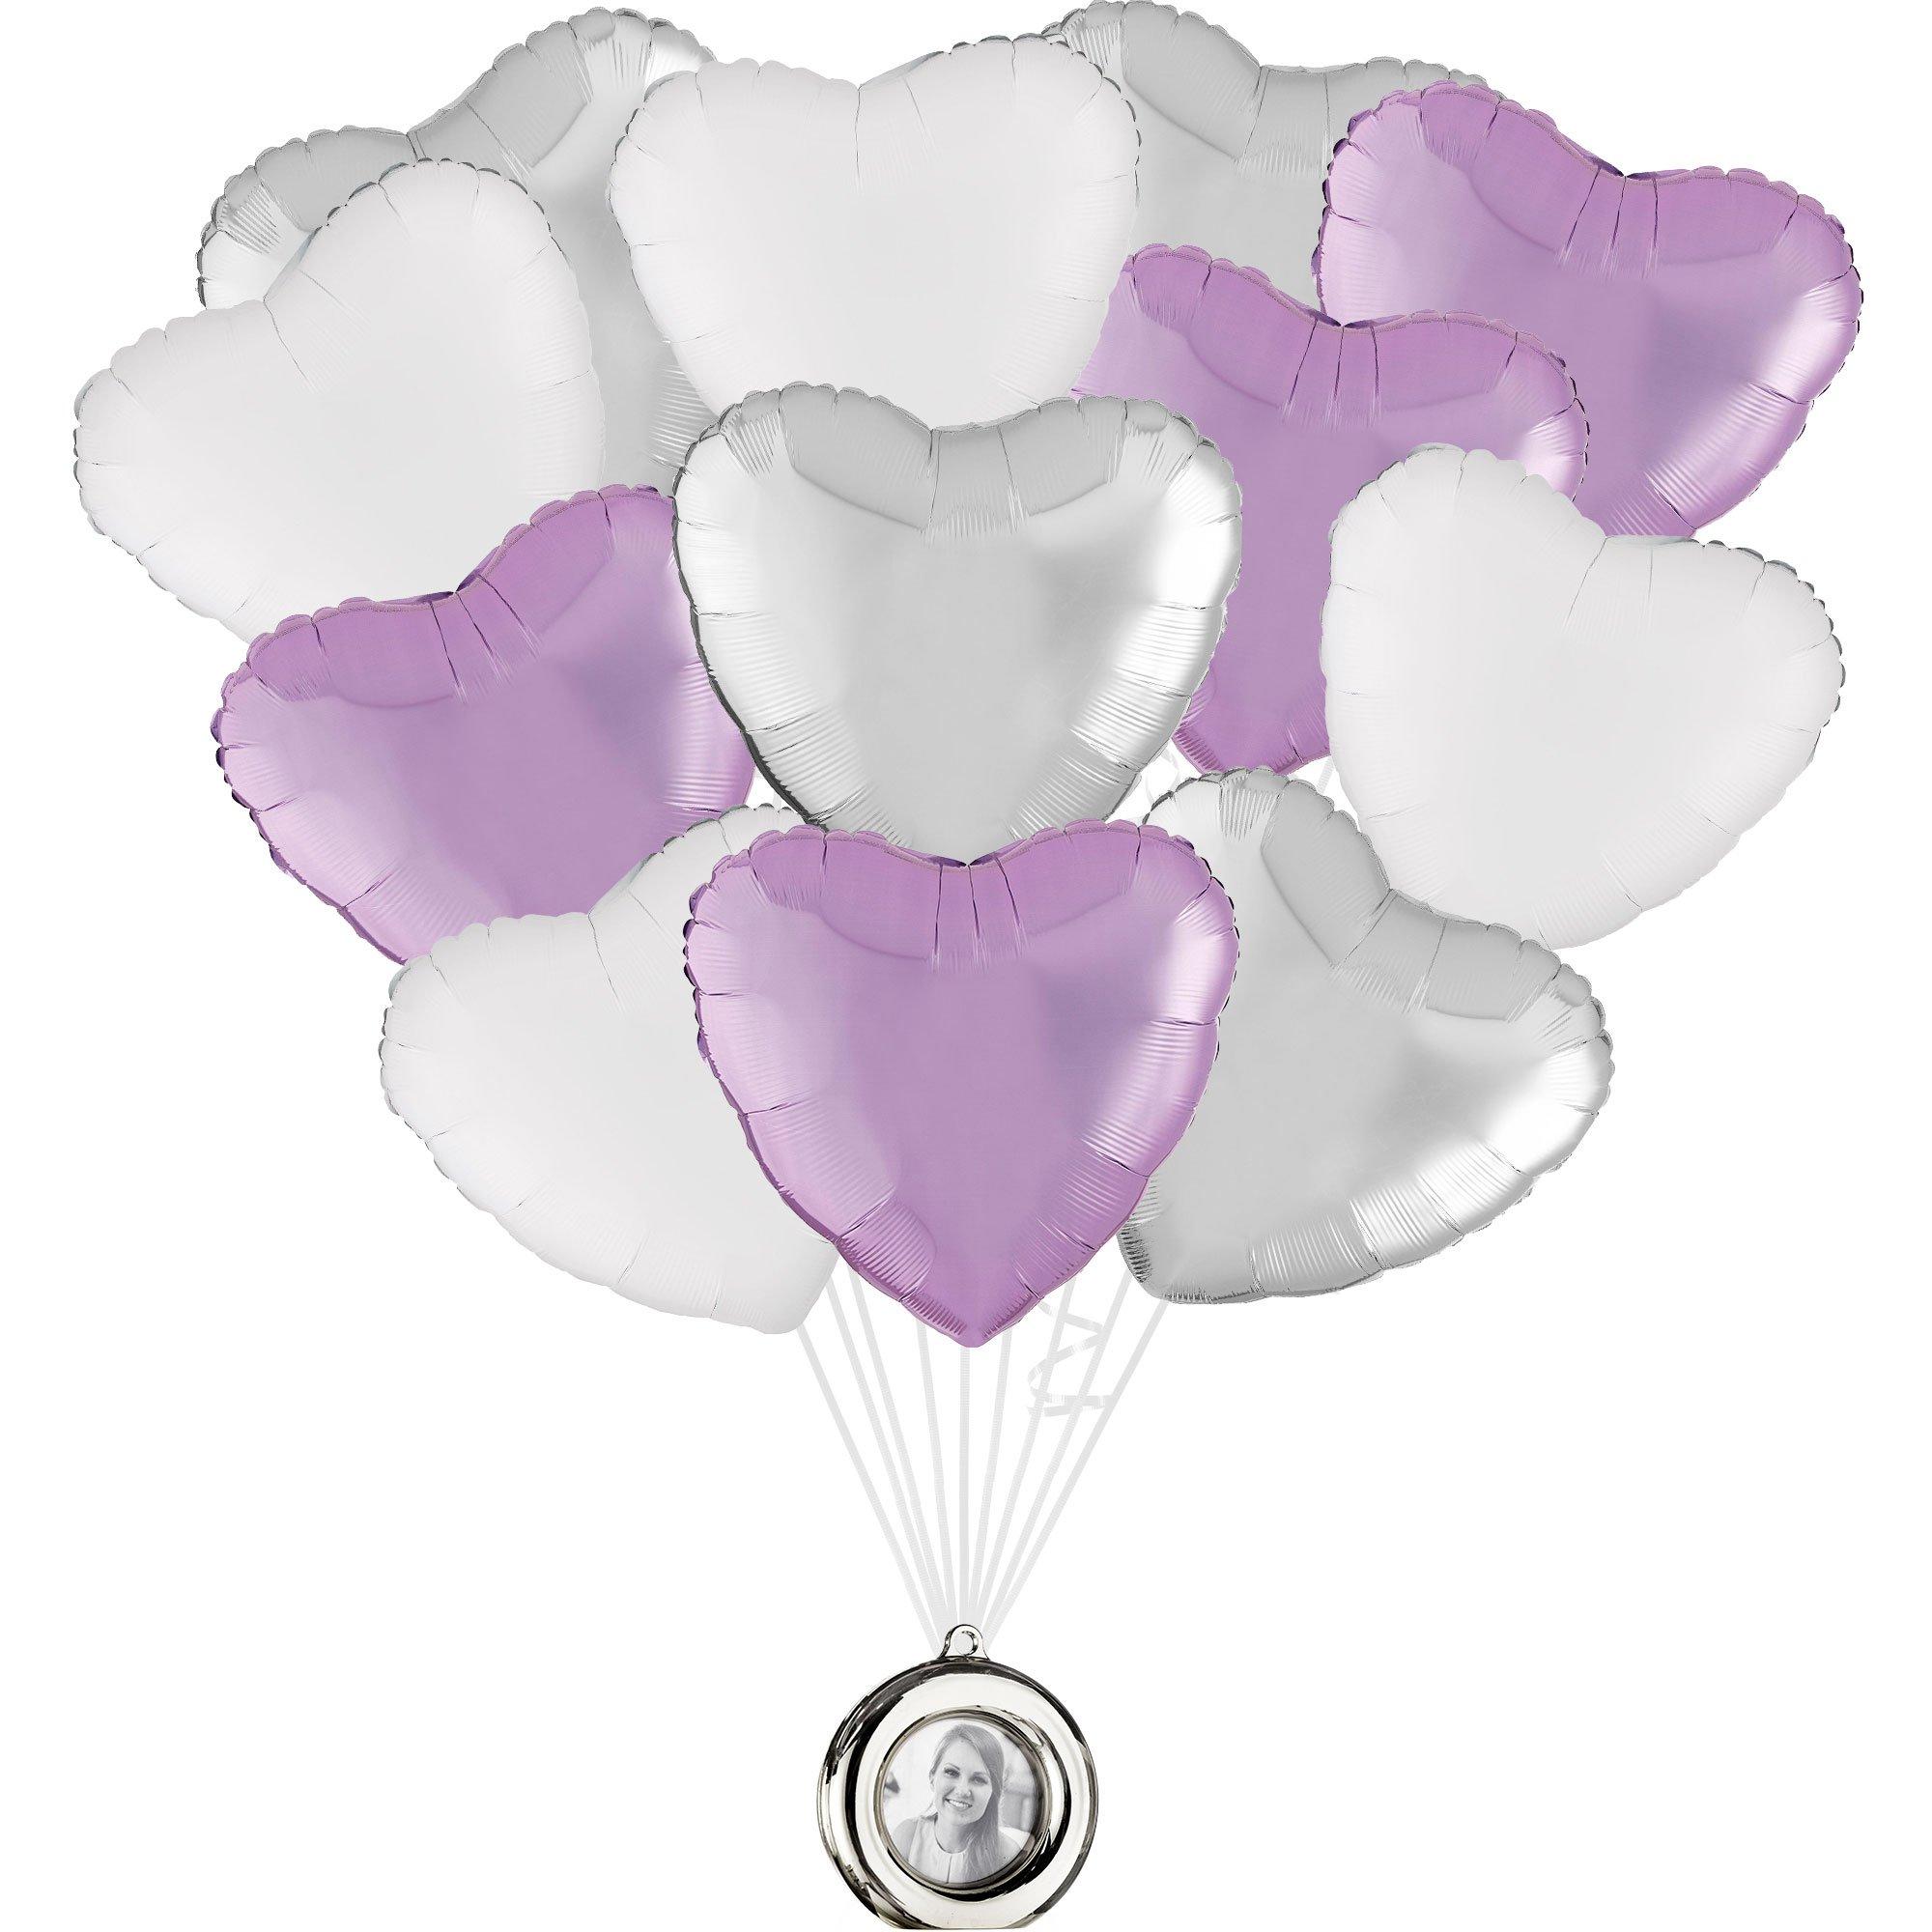 Lavender, Silver & White Heart Foil Balloon Bouquet with Photo Frame Balloon Weight